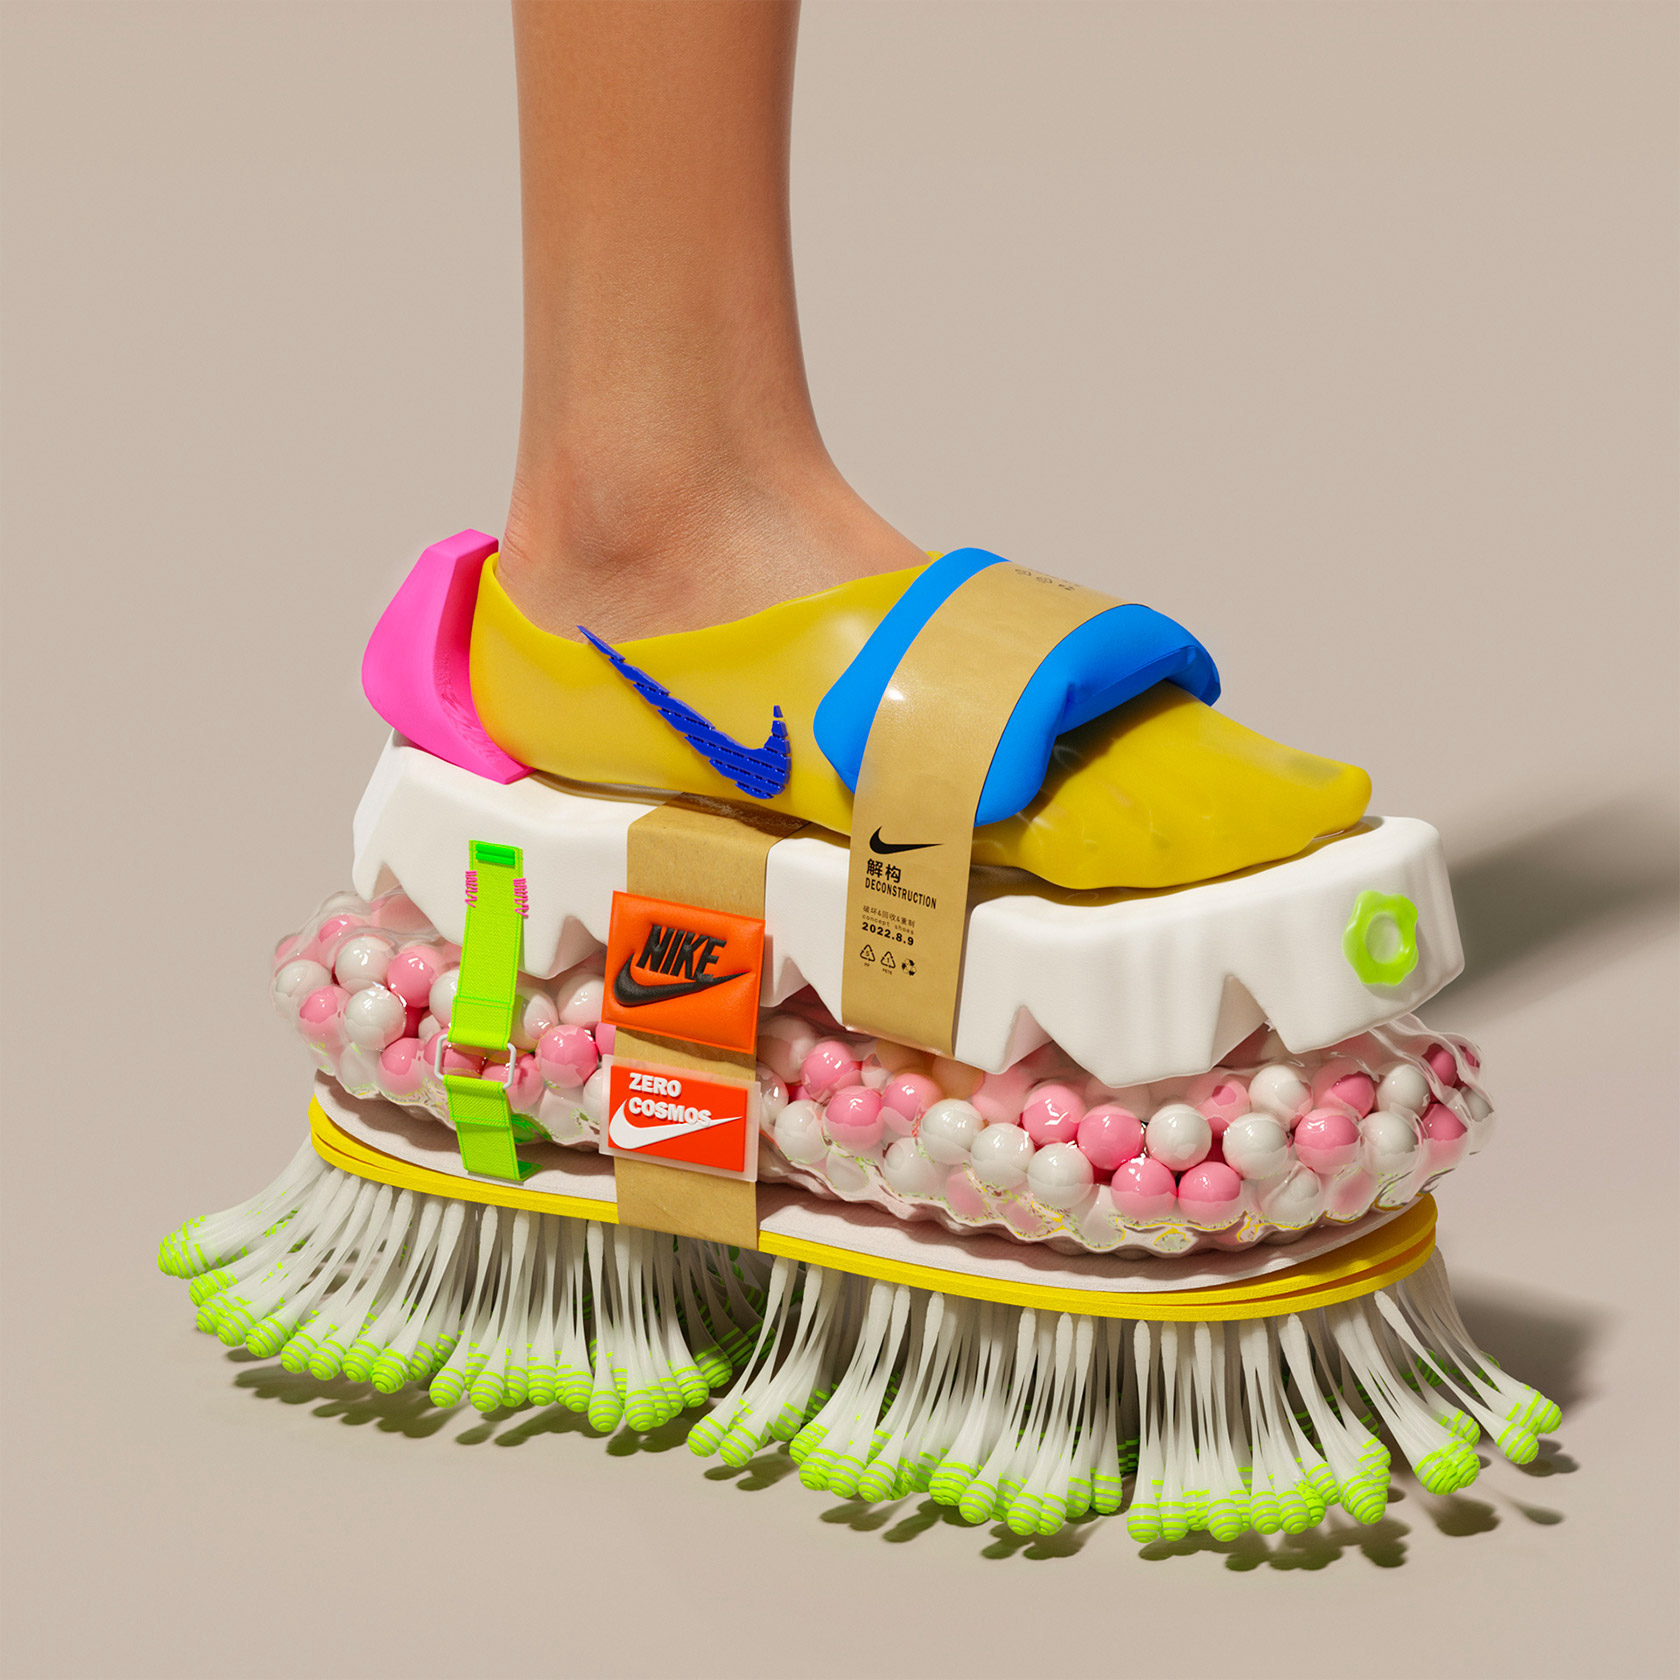 Previs site Eve Indulge A Chinese artist's absurd and bizarre Nikes | Collater.al